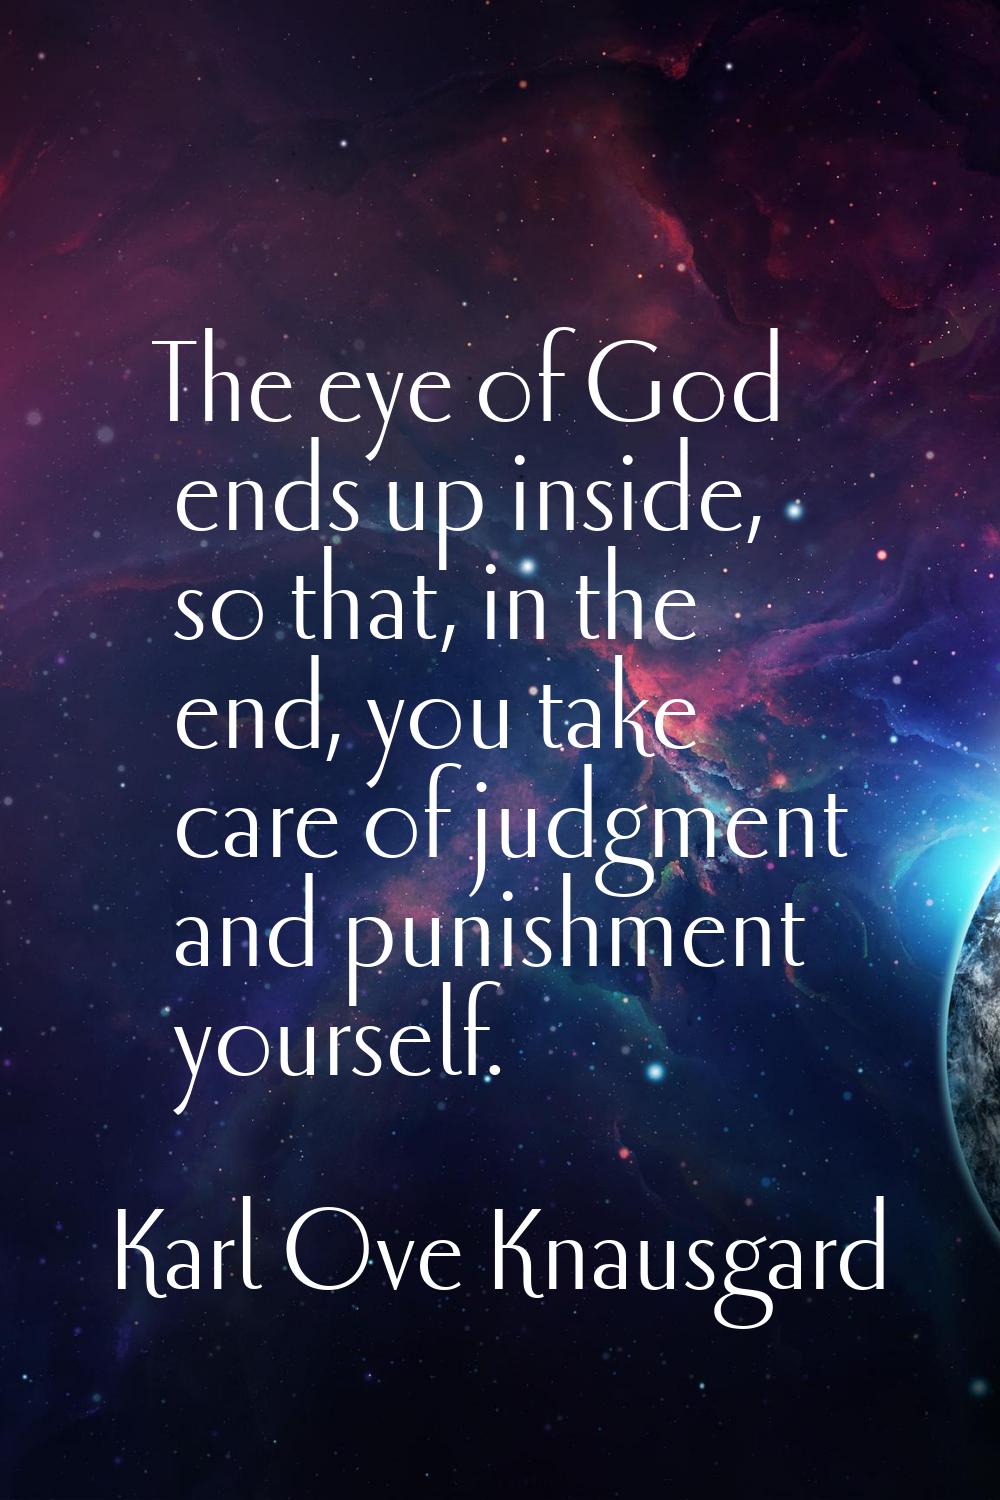 The eye of God ends up inside, so that, in the end, you take care of judgment and punishment yourse